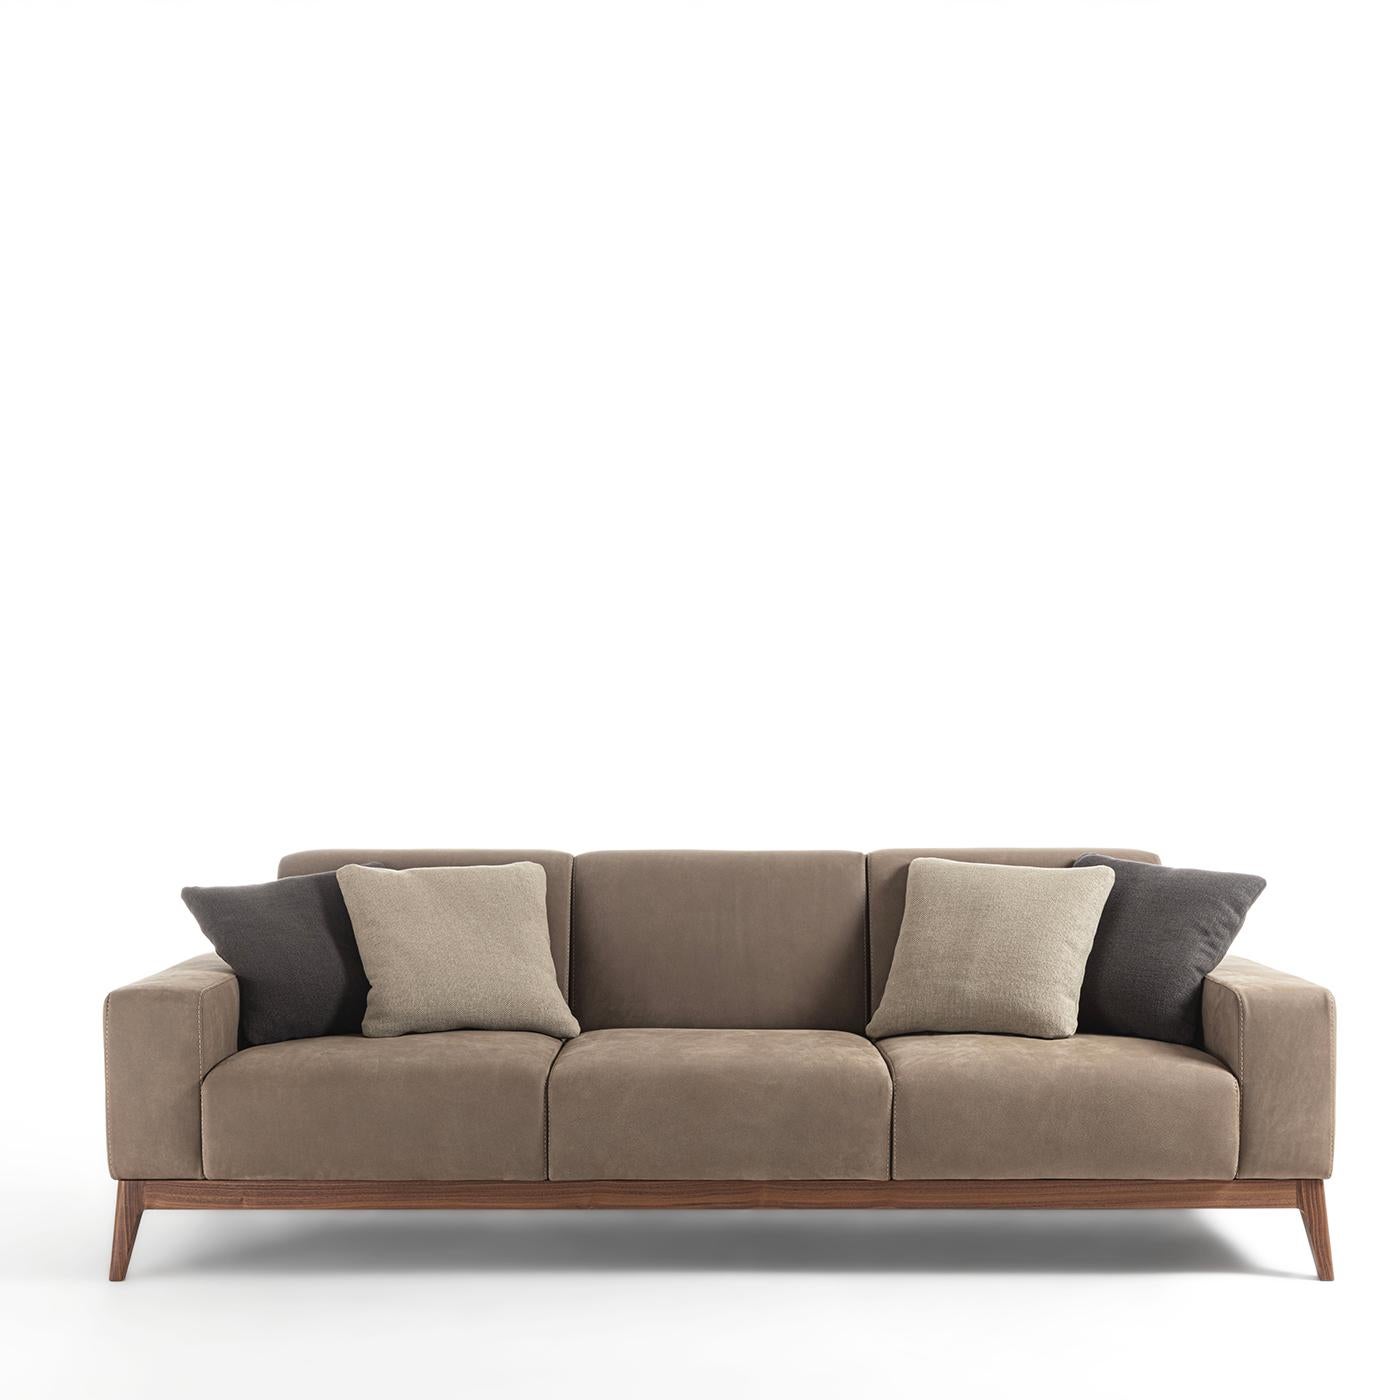 This sophisticated three-seater sofa was designed with a sense of quiet, timeless elegance and comfort in mind. Its clean lines outline bold volumes whose generous padding is wrapped by a luxe taupe-hued upholstery ensuring an unforgettable tactile